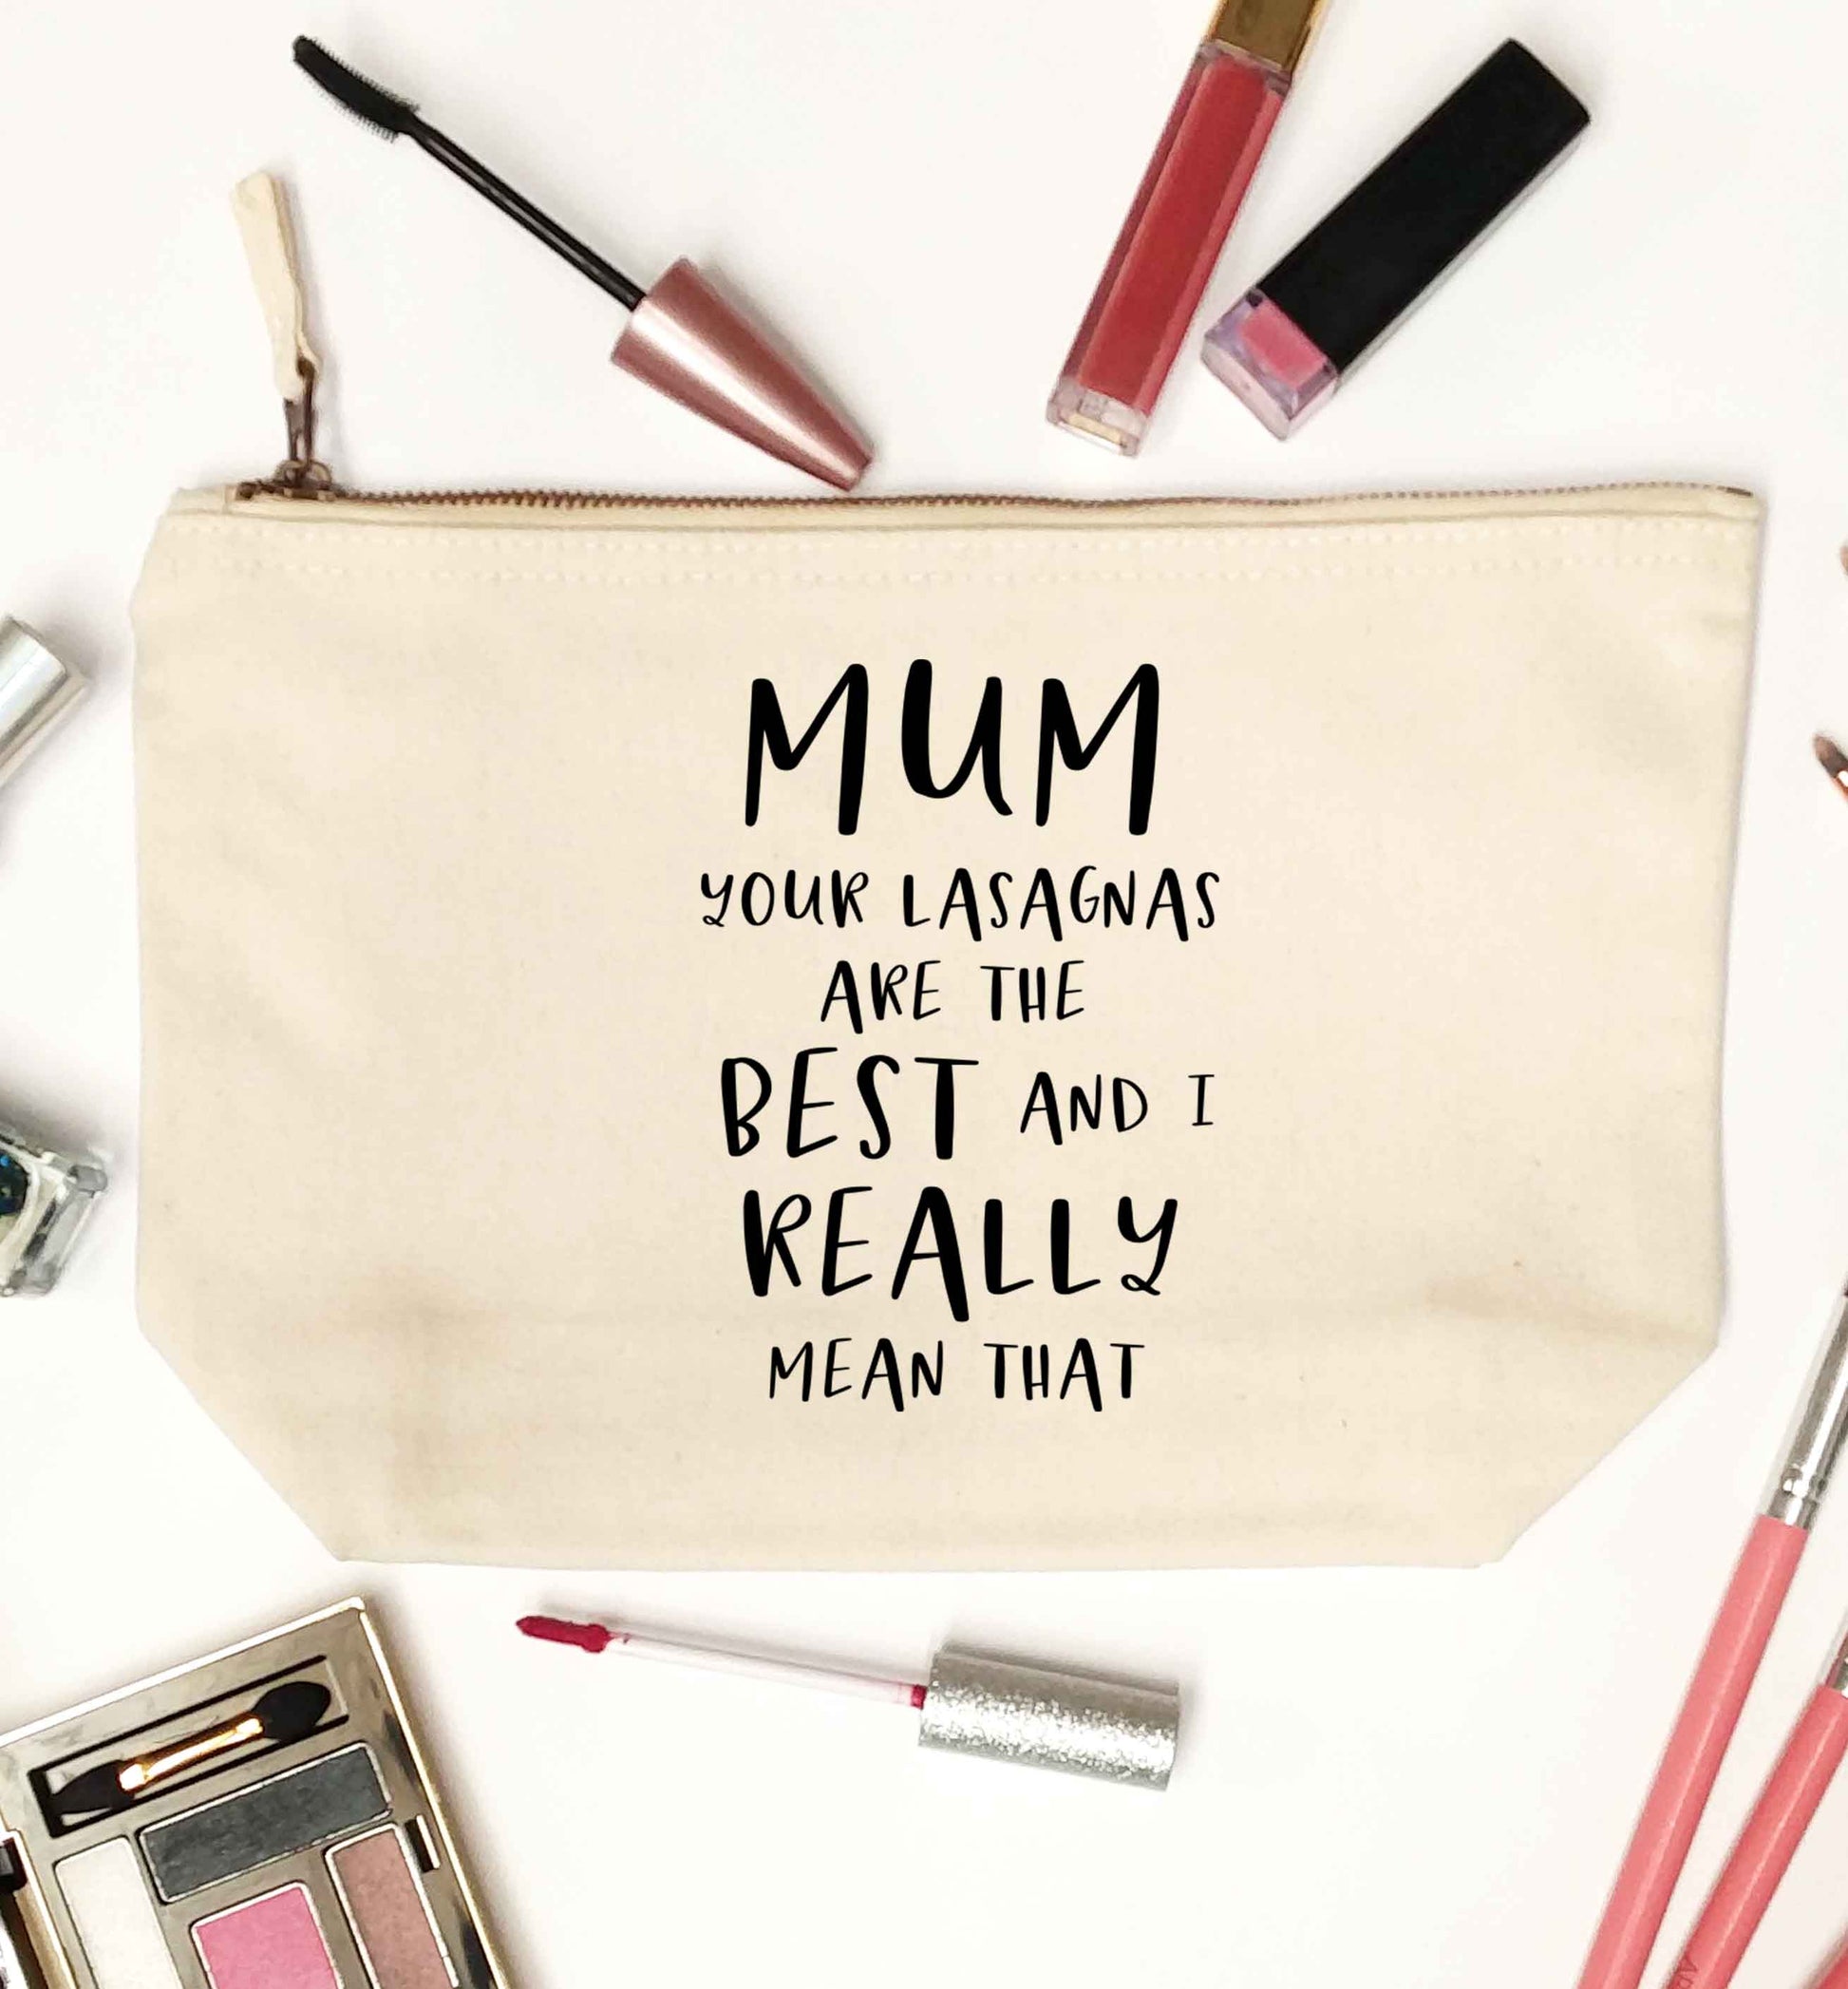 Funny gifts for your mum on mother's dayor her birthday! Mum your lasagnas are the best and I really mean that natural makeup bag